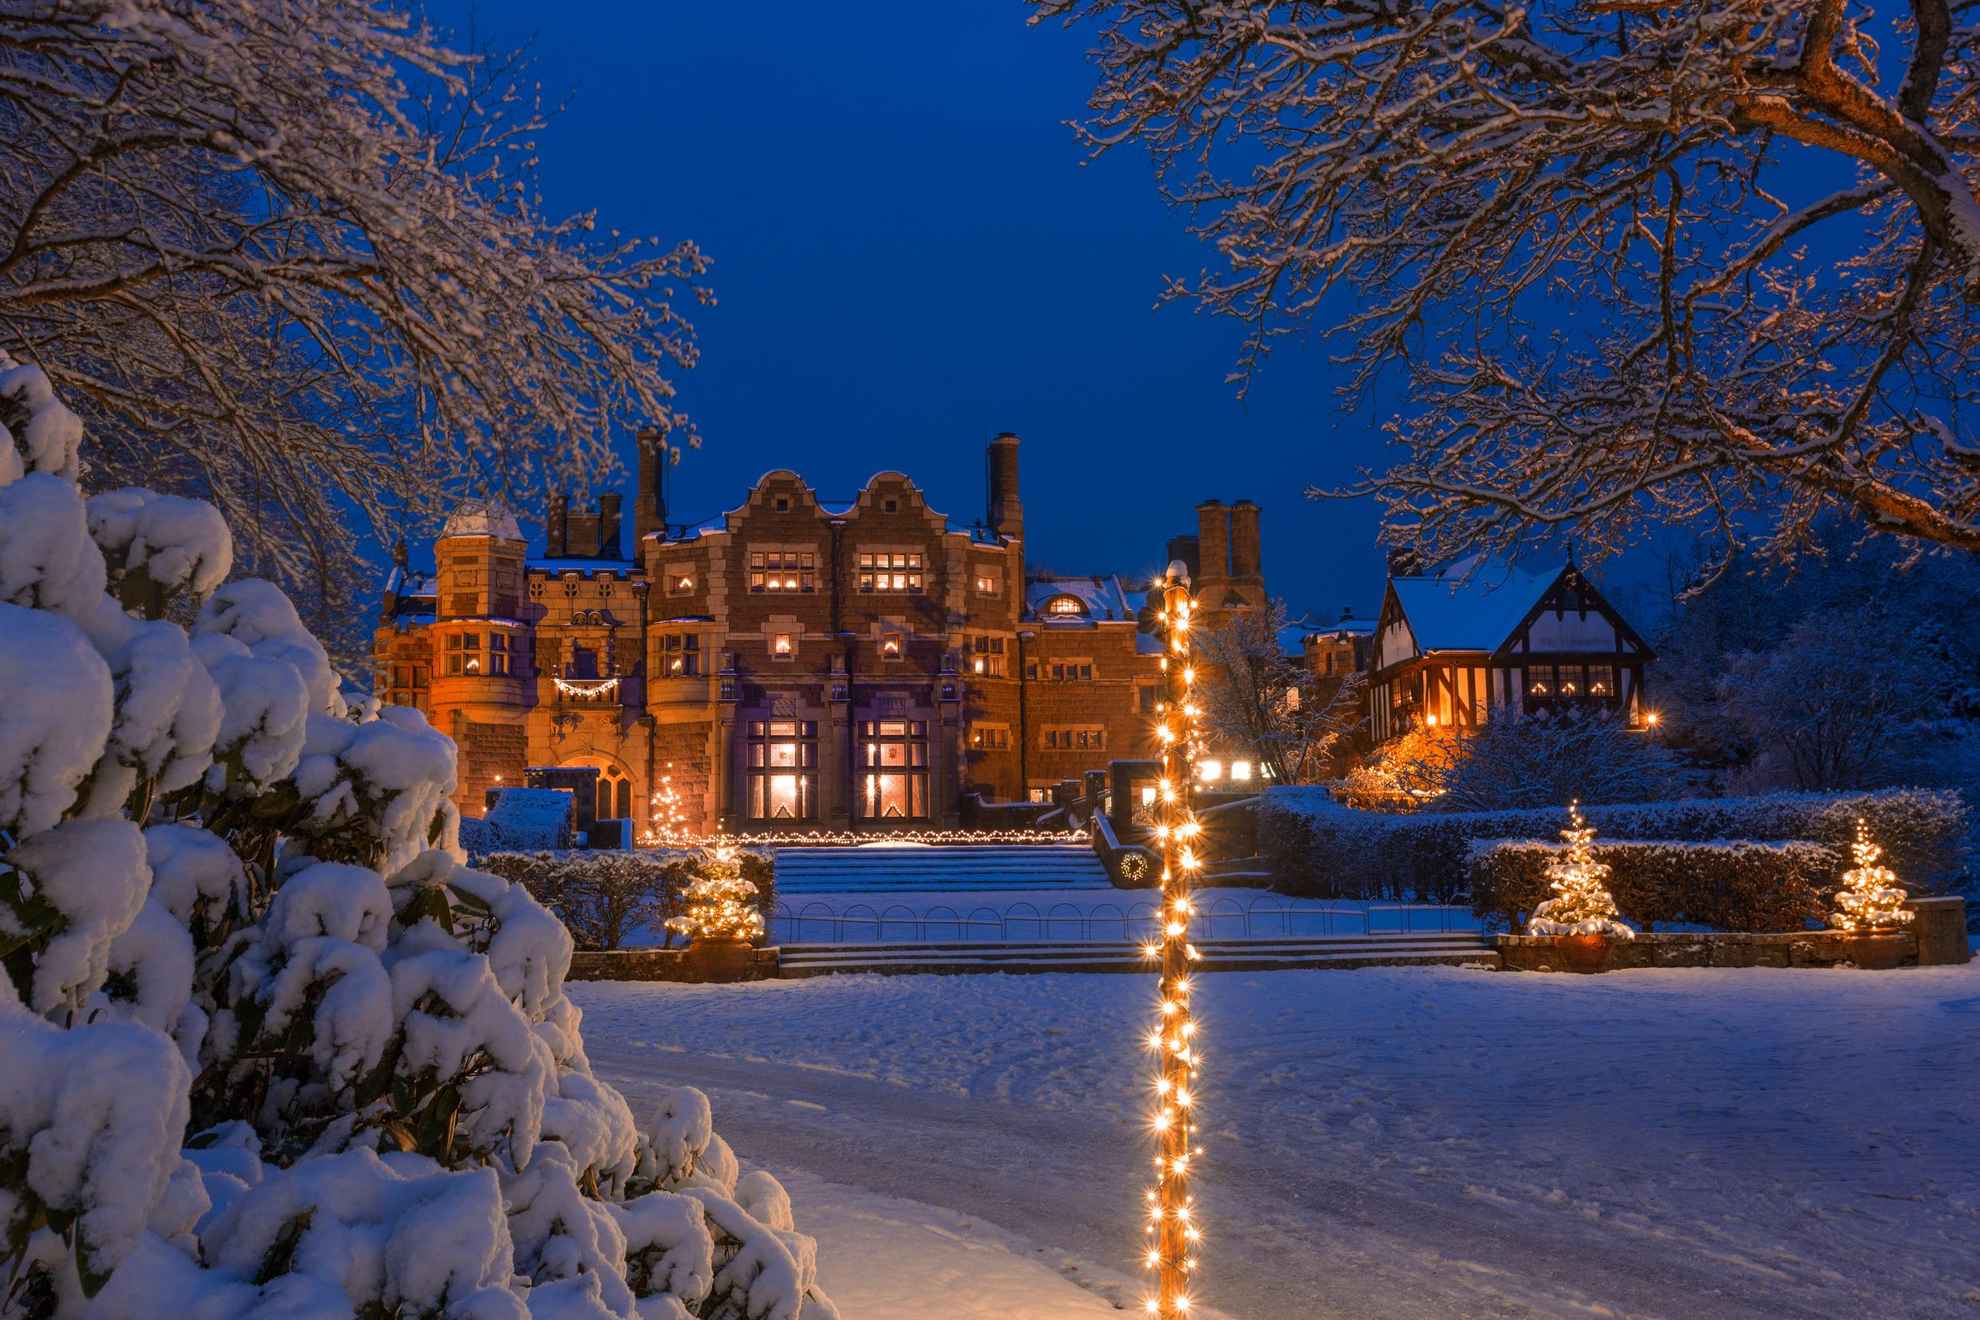 A castle covered in snow and Christmas lights at dusk.